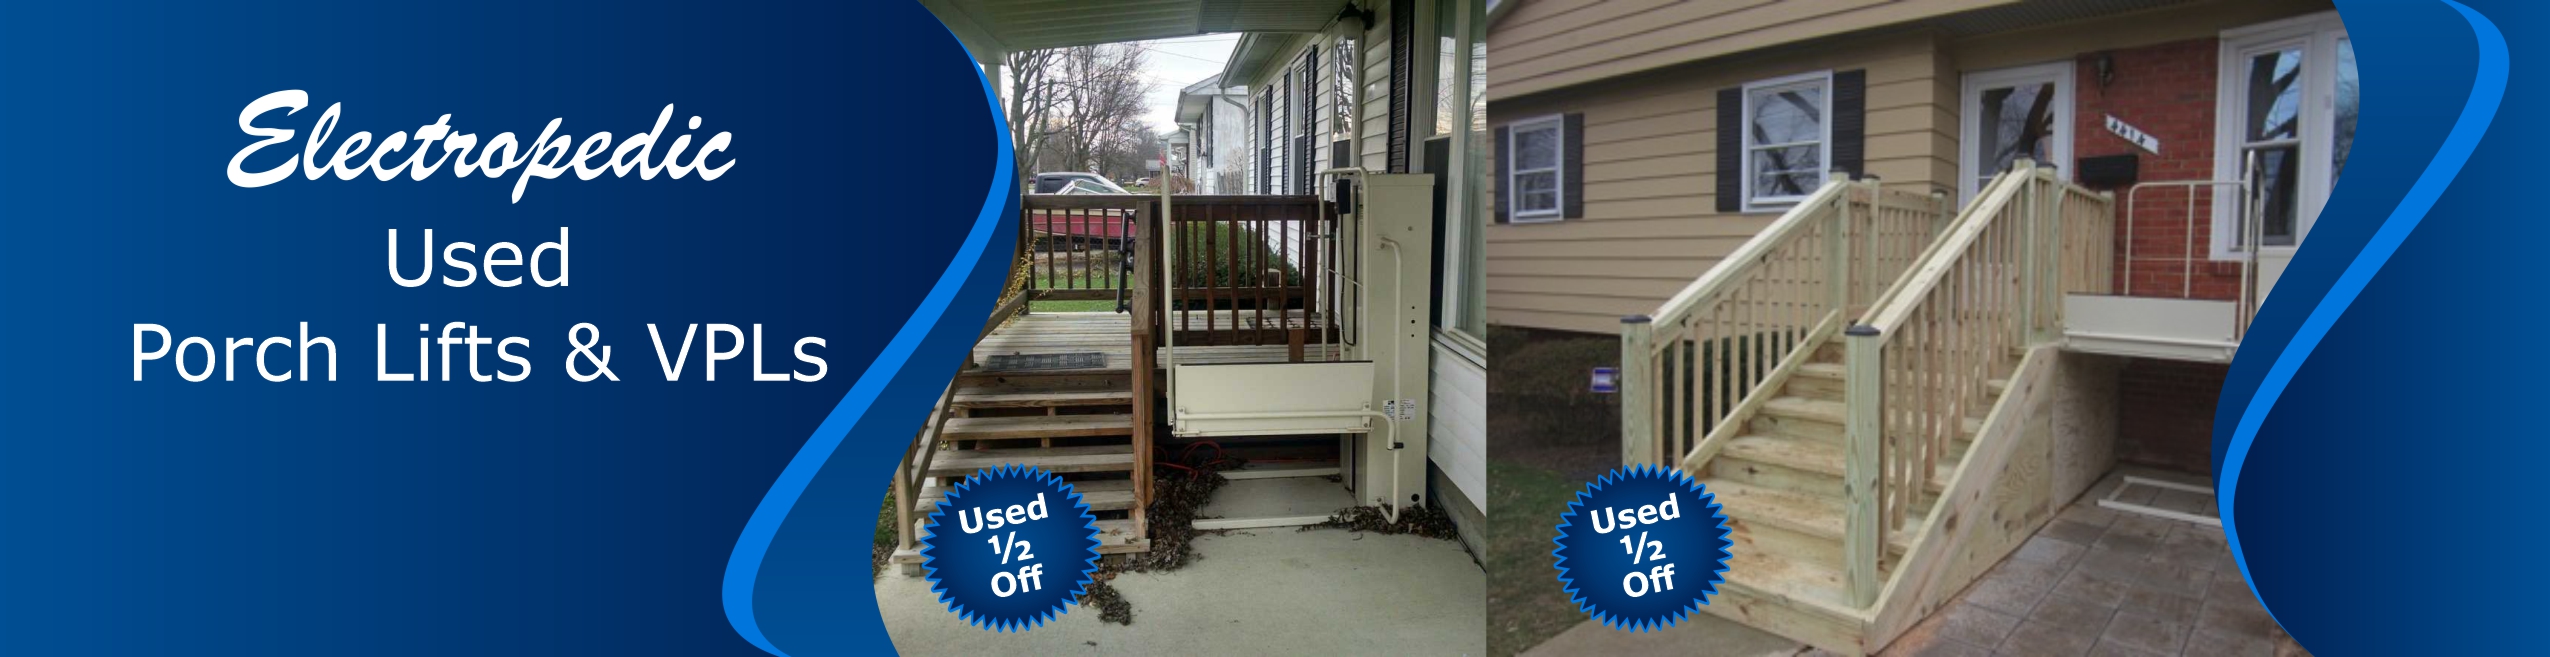 Used Porch Lifts & VPLs ½ Off